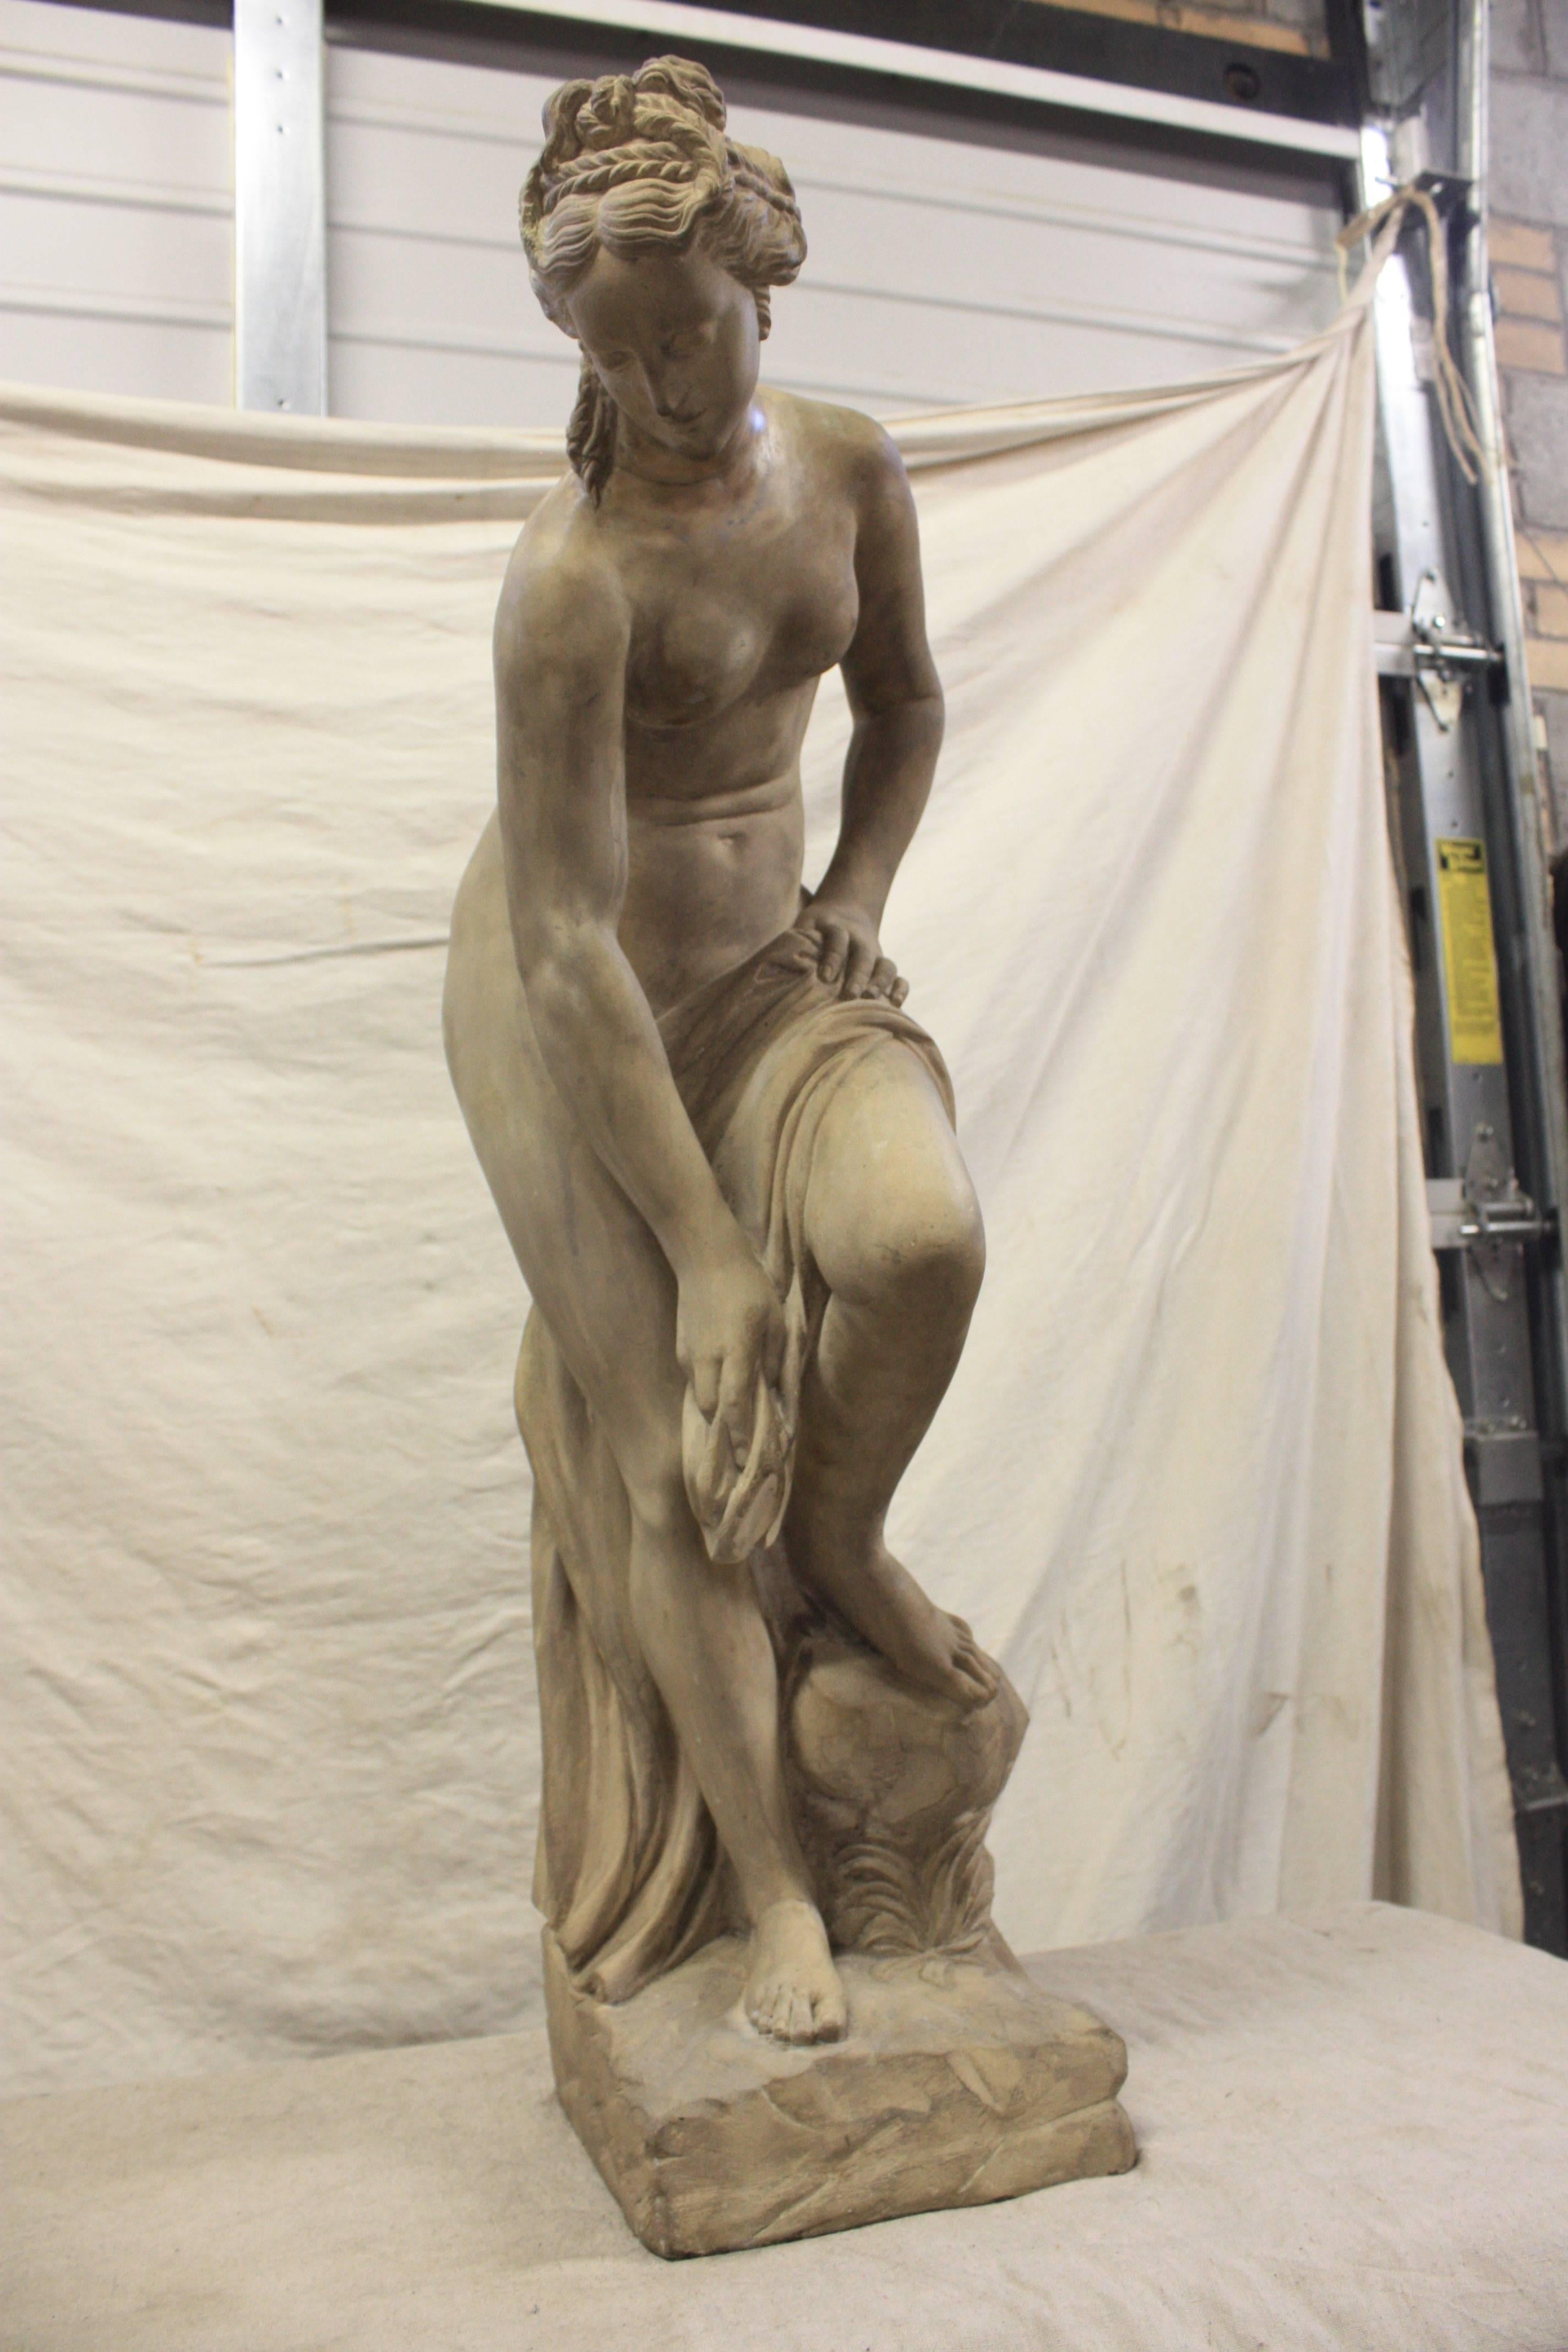 19th century French marble sculpture. The marble is patinated.